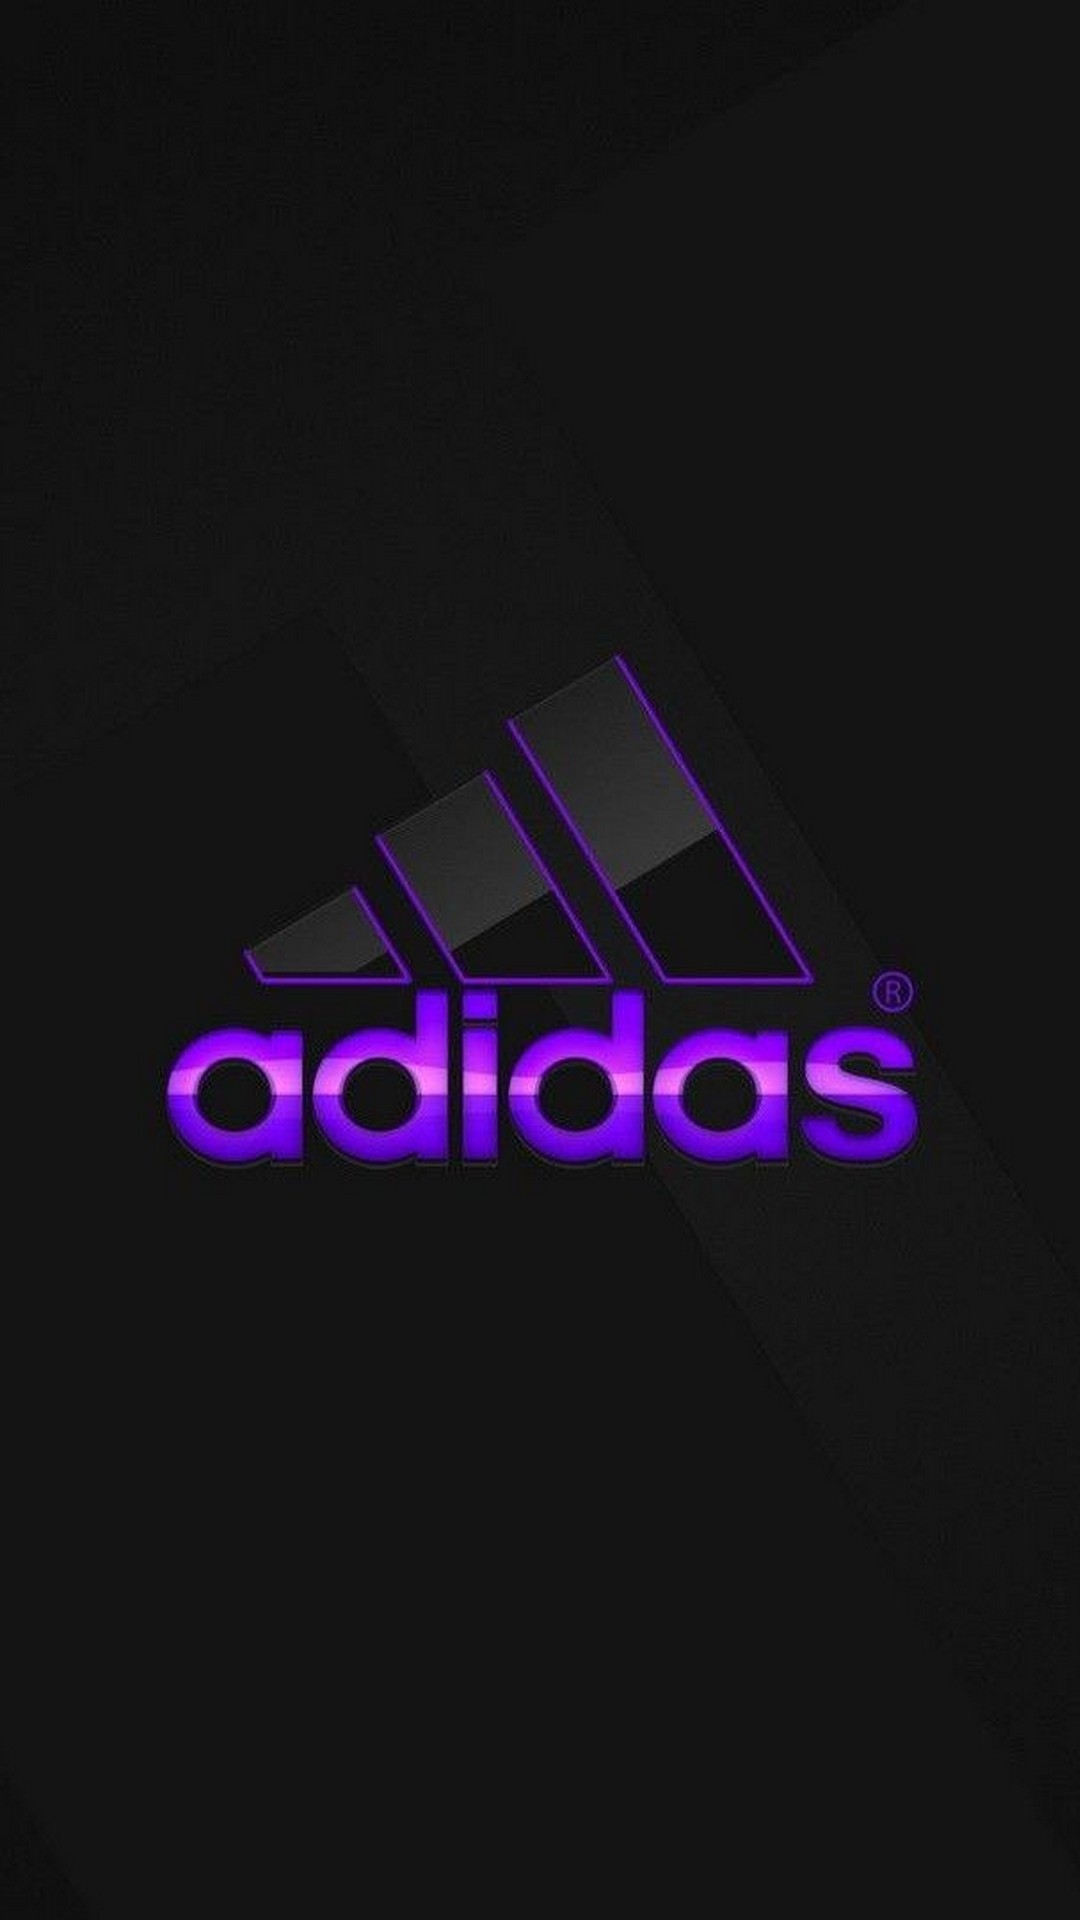 wallpaper adidas for android